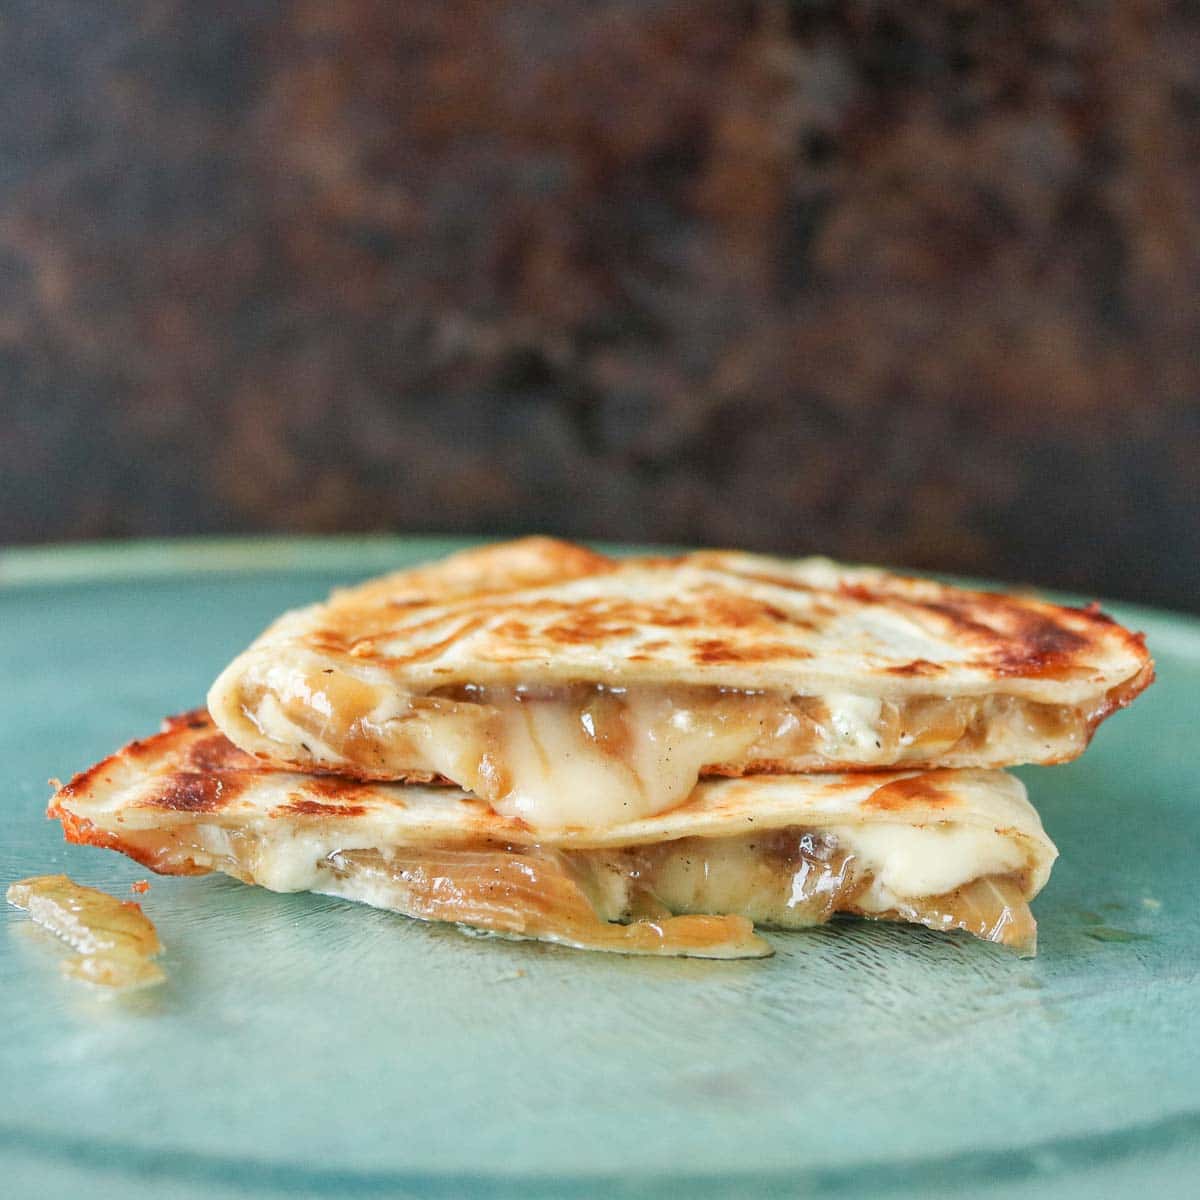 Stack of two caramelized onion quesadillas.